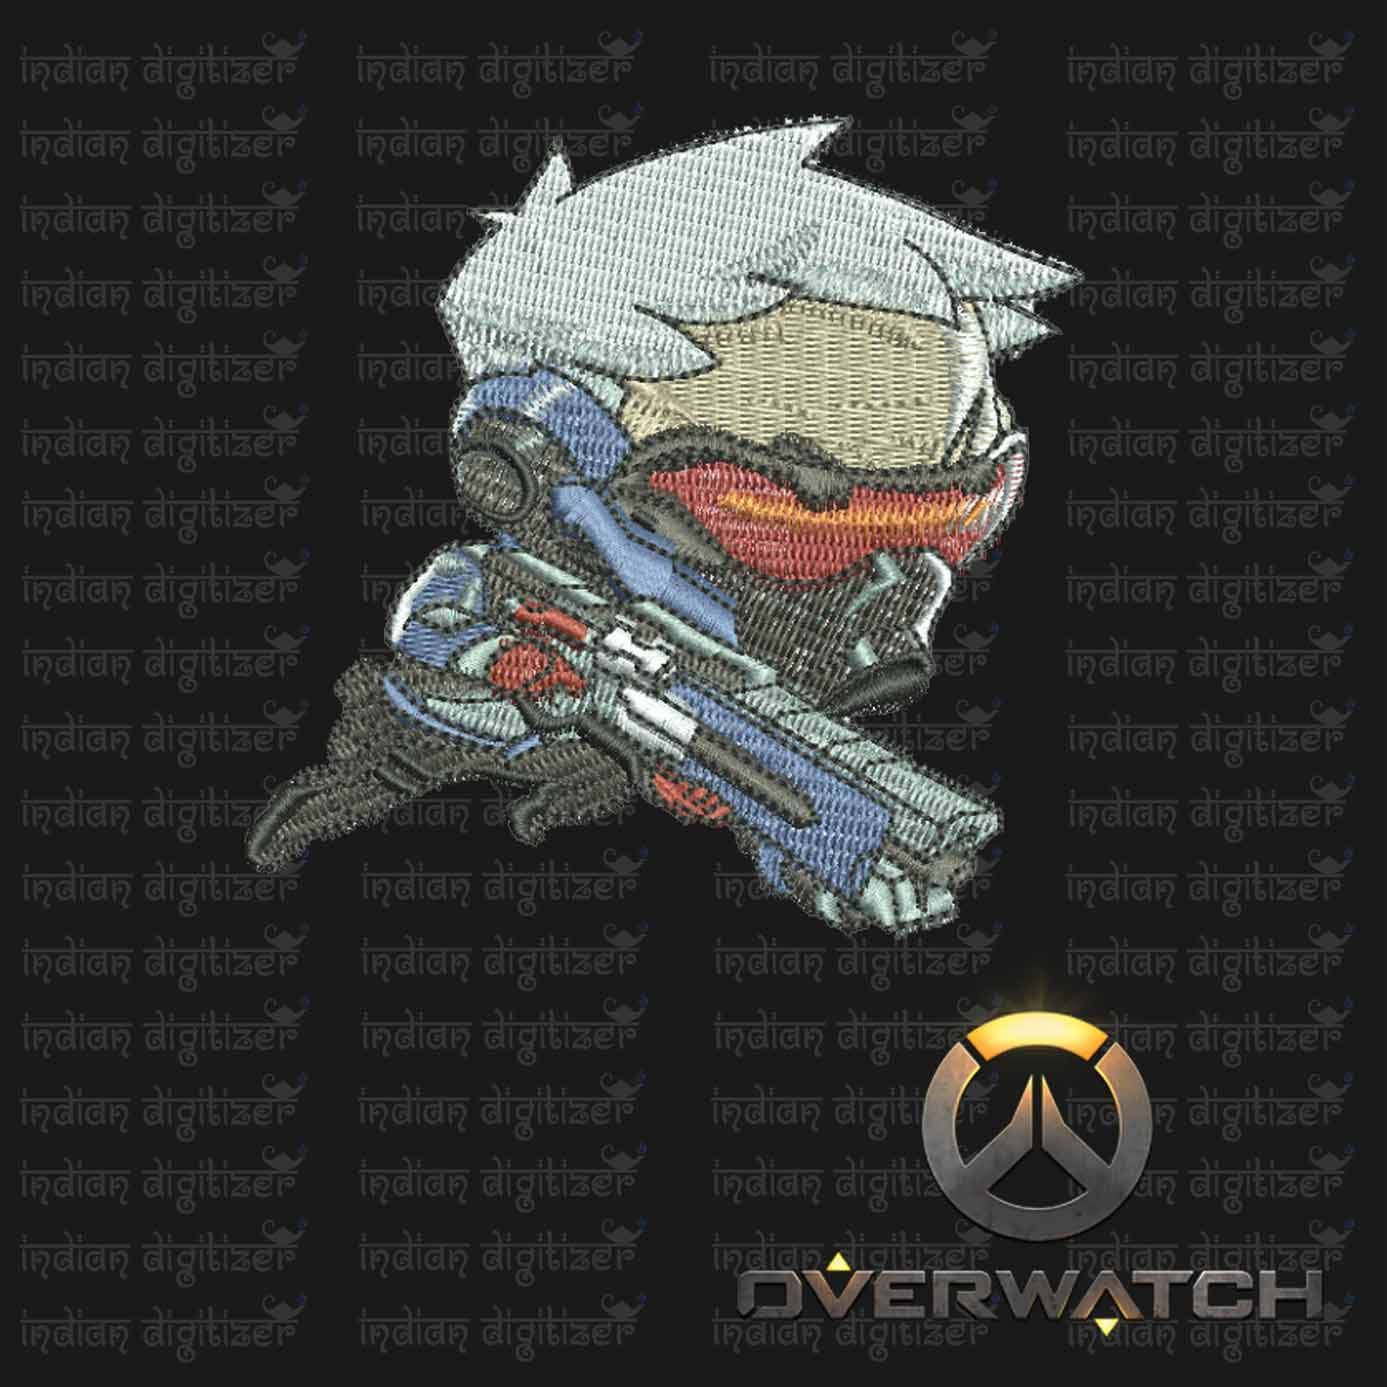 Overwatch Embroidery Designs - Soldier 76 individual character for 4x4in hoop - resizable with freely downloadable software.